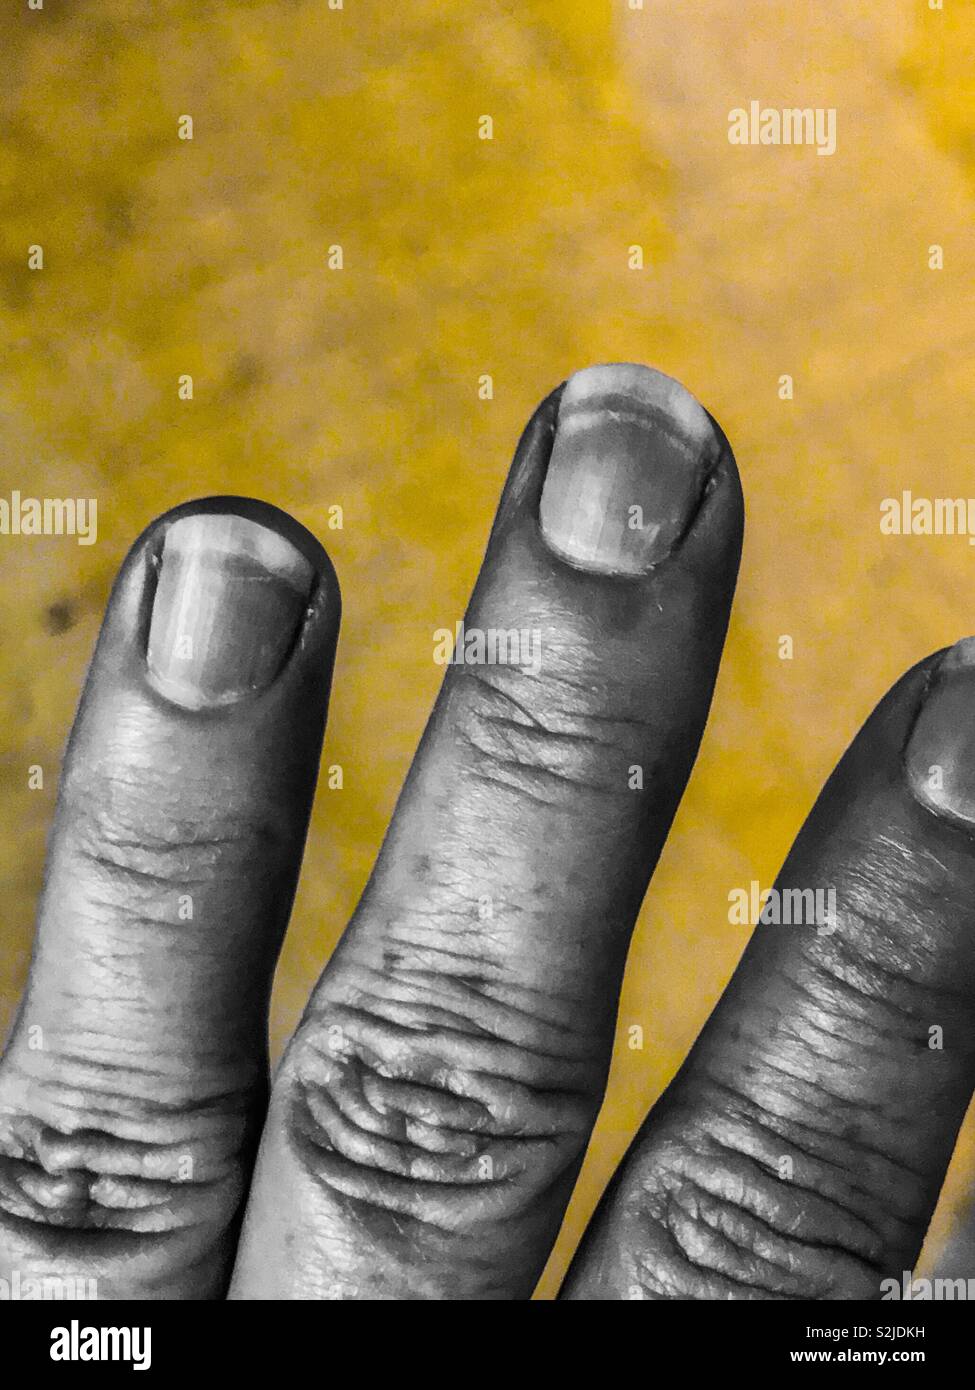 Yellow color pop photo of injury to fingernail indicated by a white mark Stock Photo